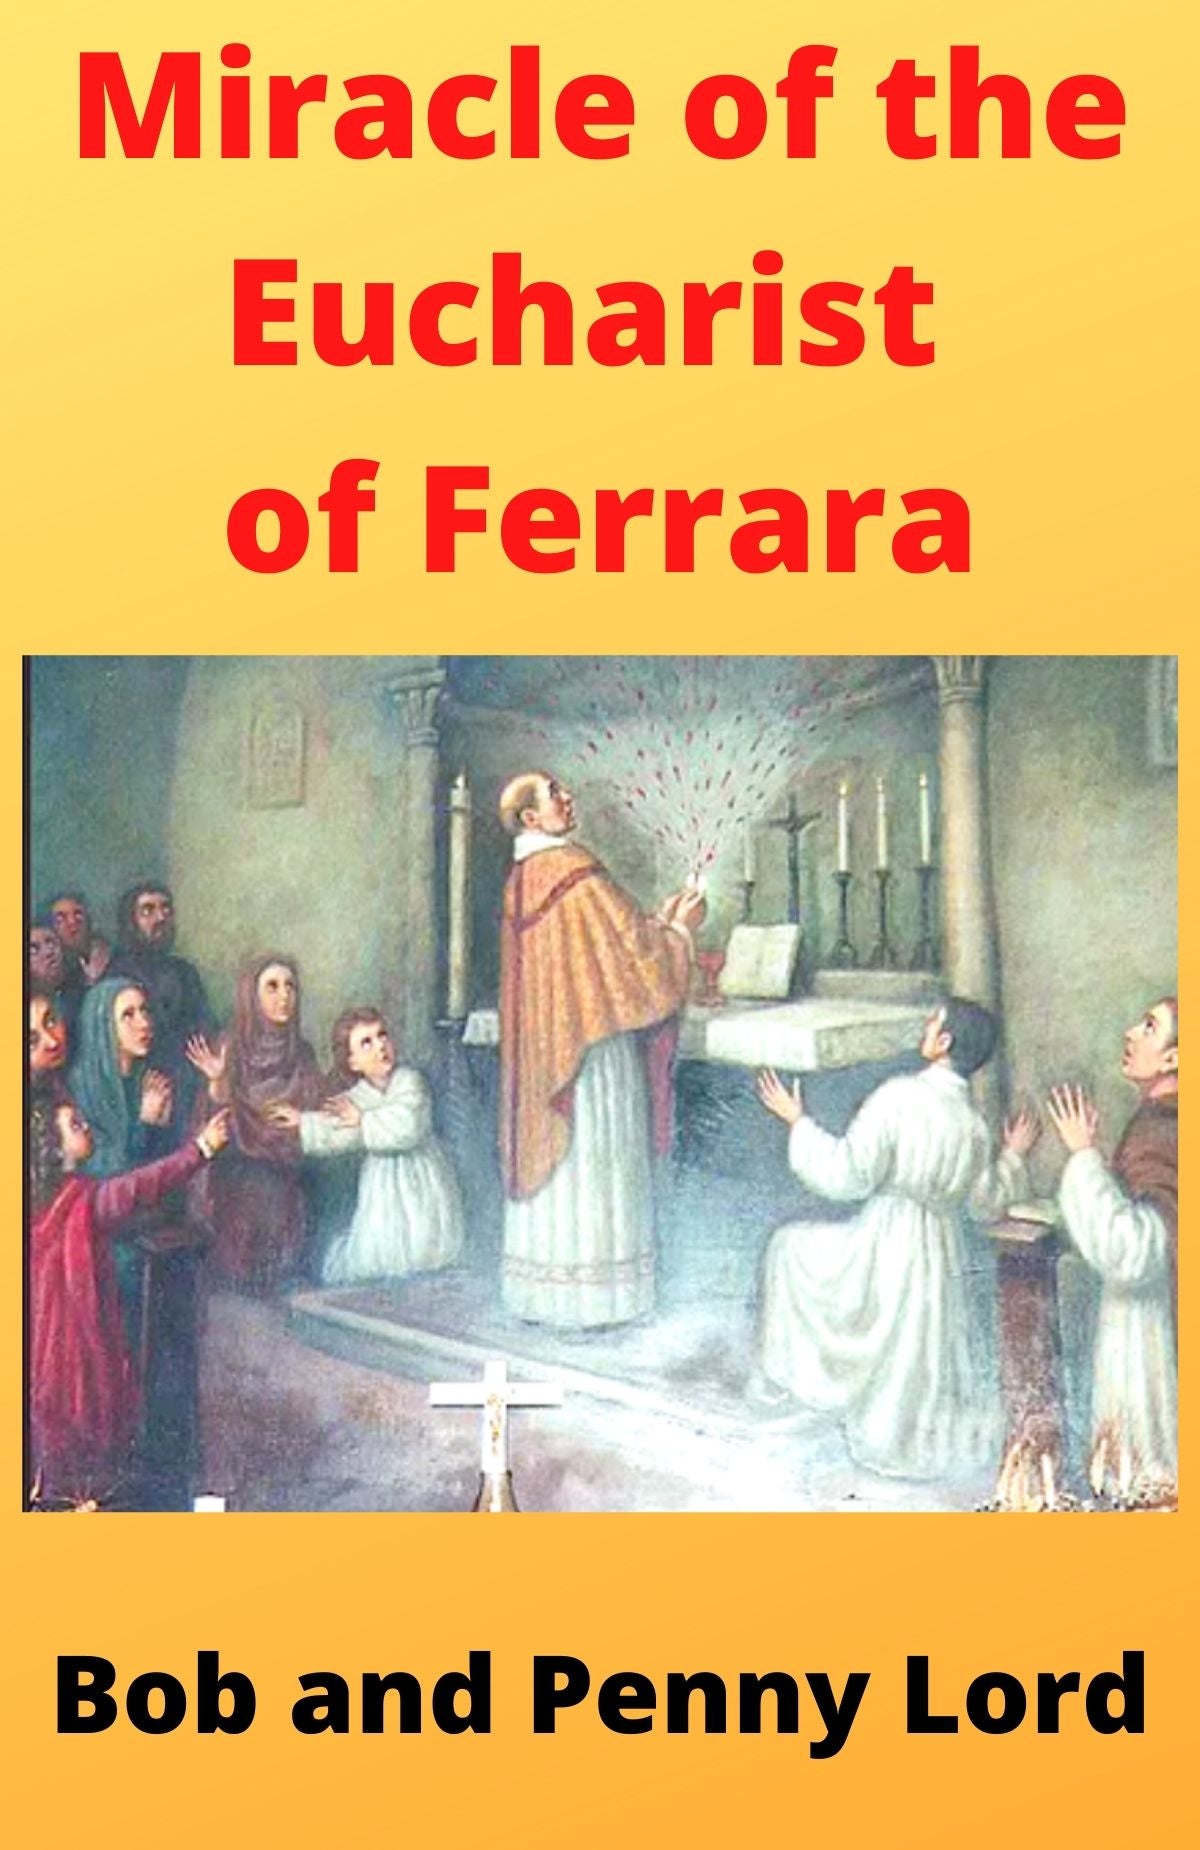 Miracles of the Eucharist Best Seller Books I and II and DVD - Bob and Penny Lord